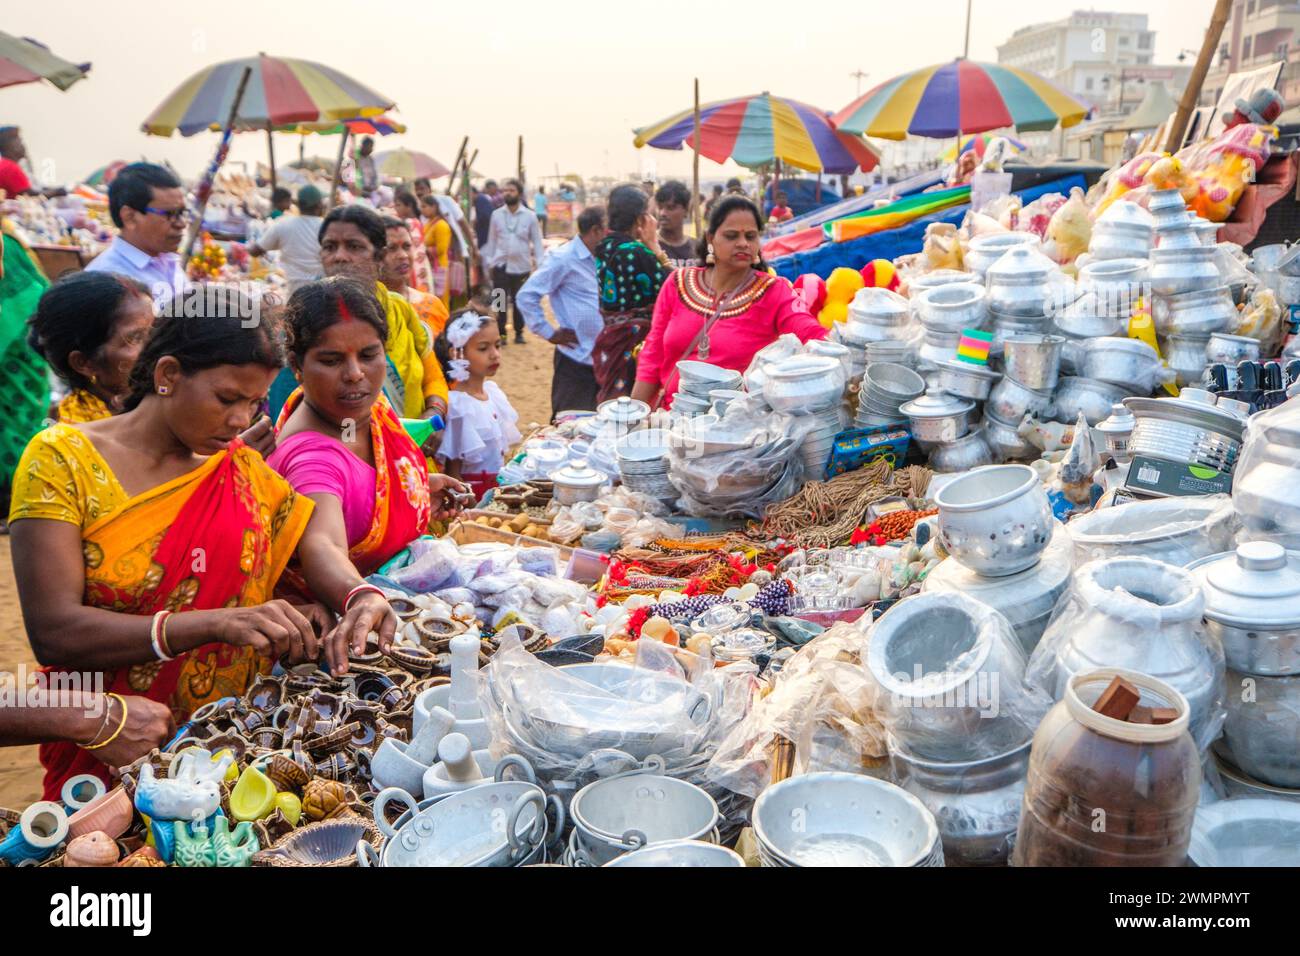 Indian women crowding around a stall selling cookware on the beach at Puri, India Stock Photo